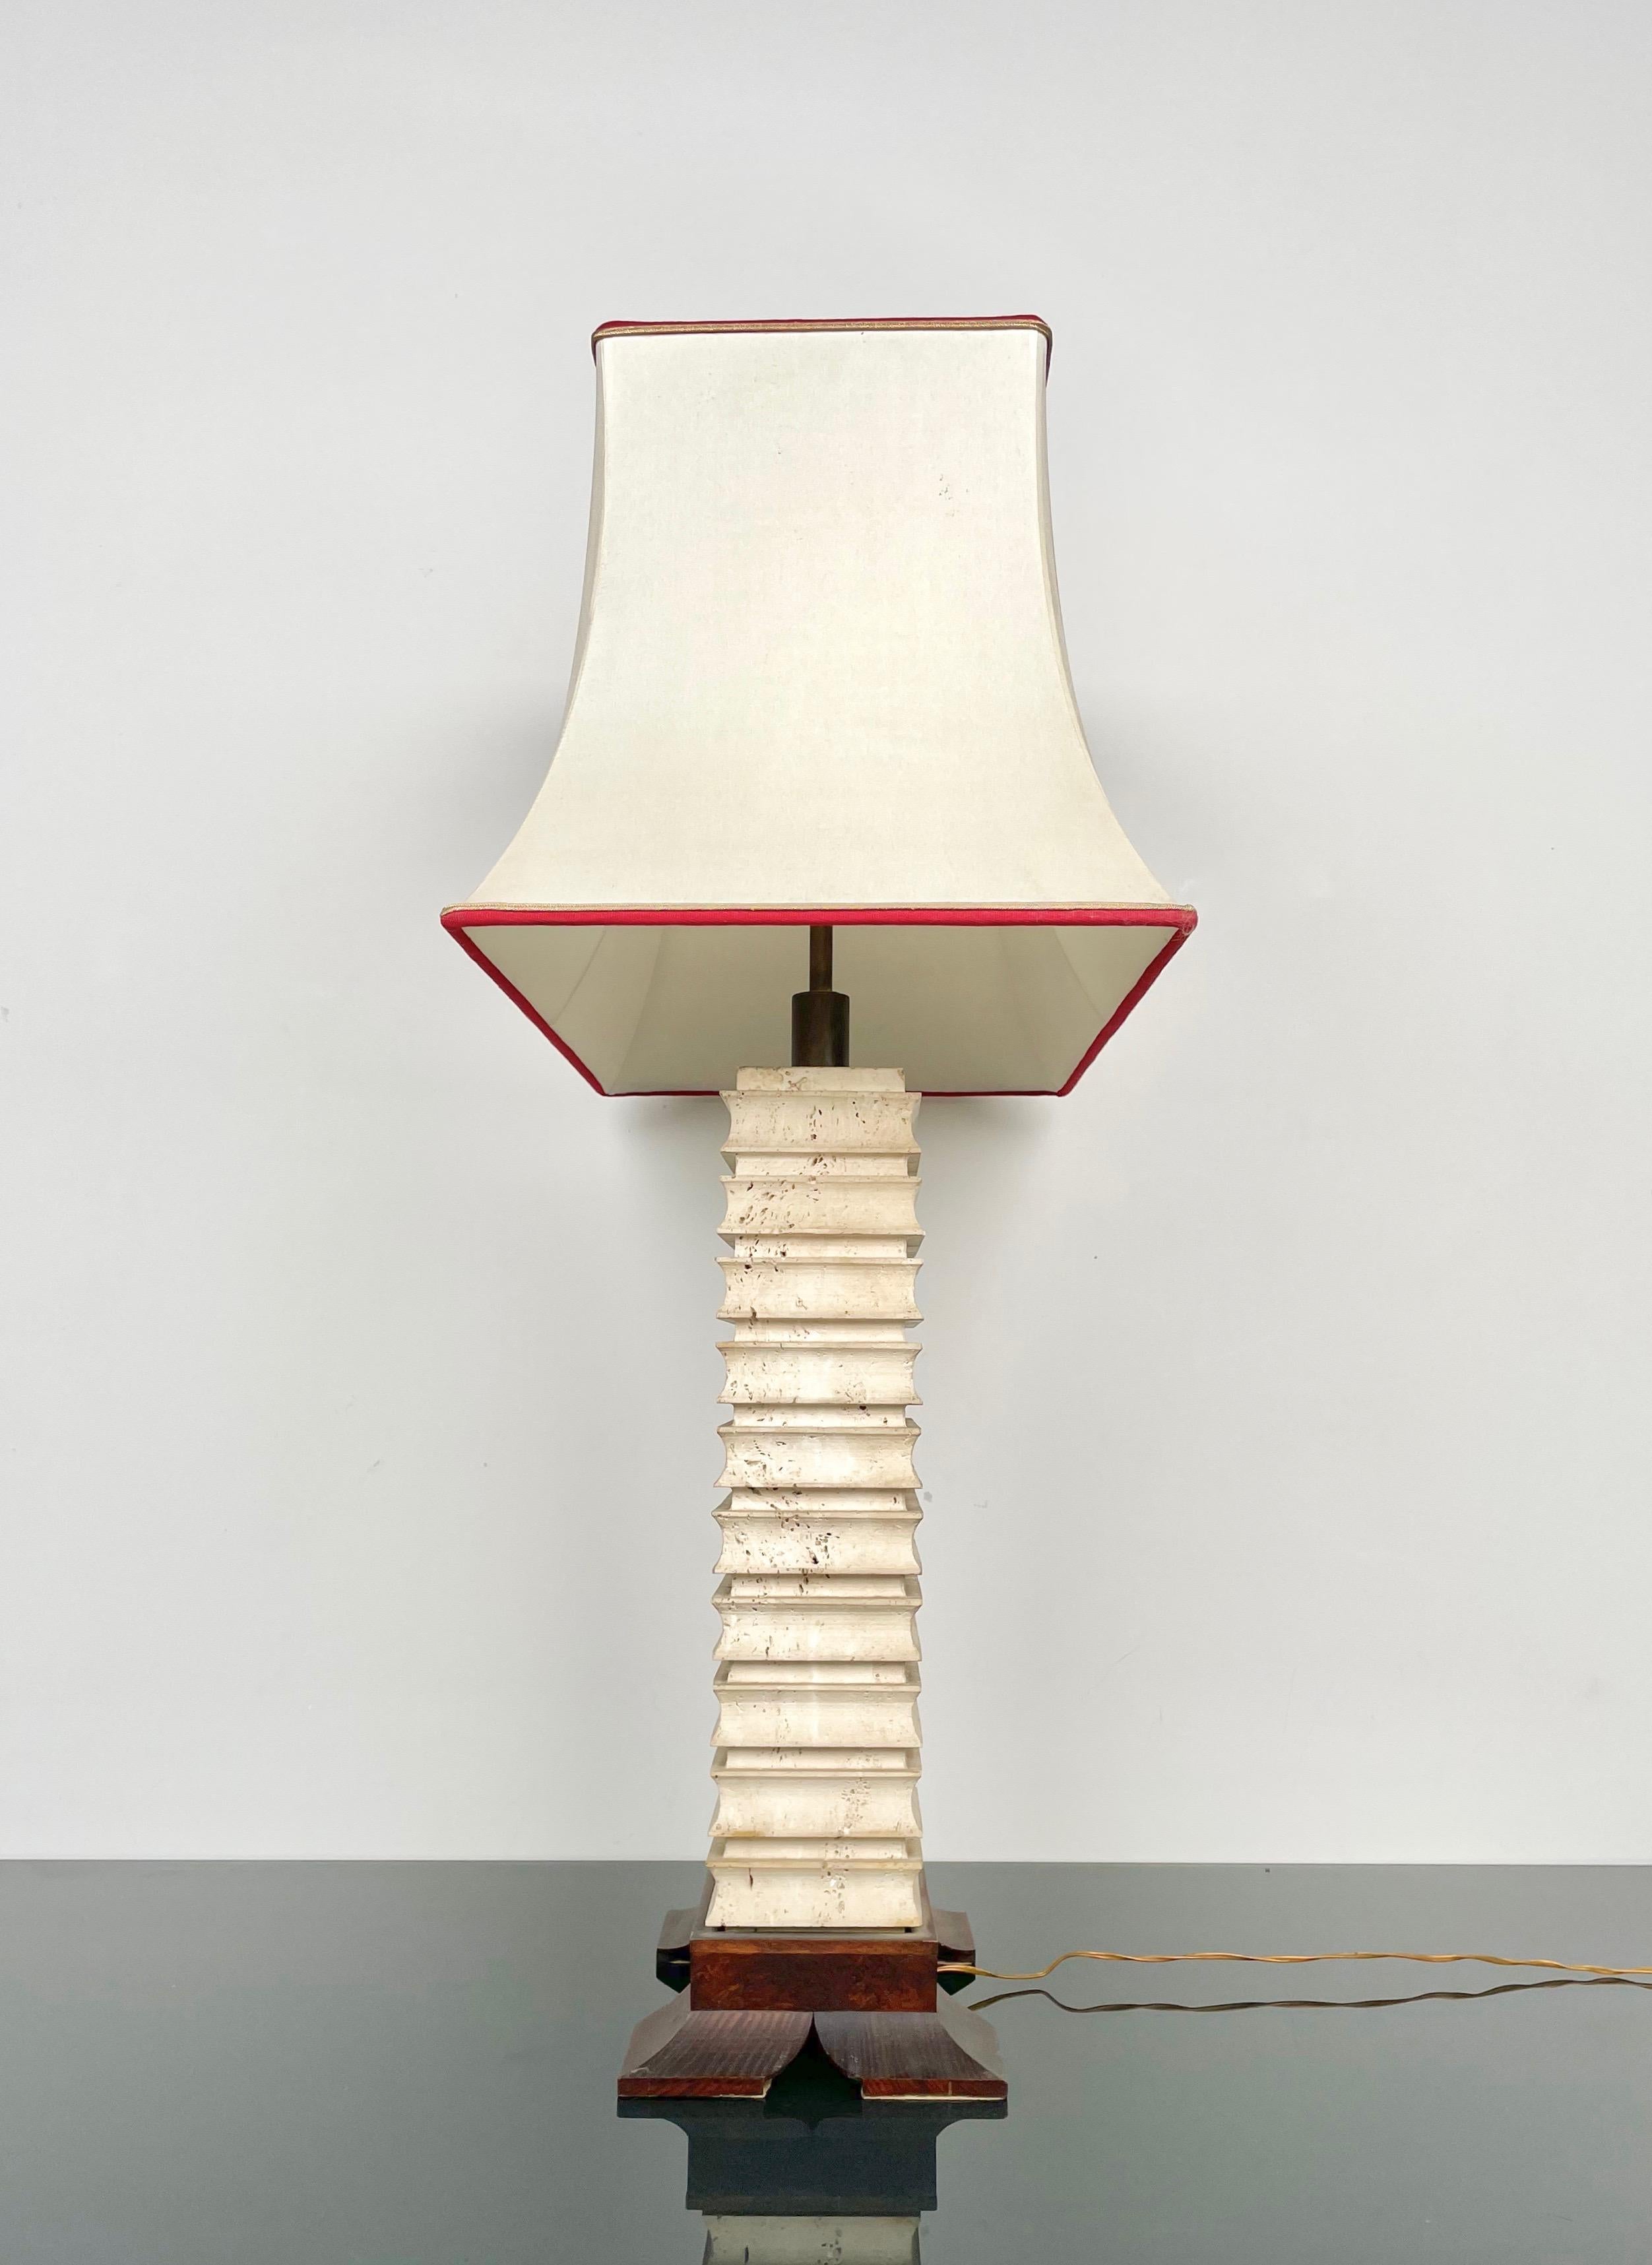 Pagoda Table Lamp in Travertine, Wood and Brass, Italy 1970s For Sale 3